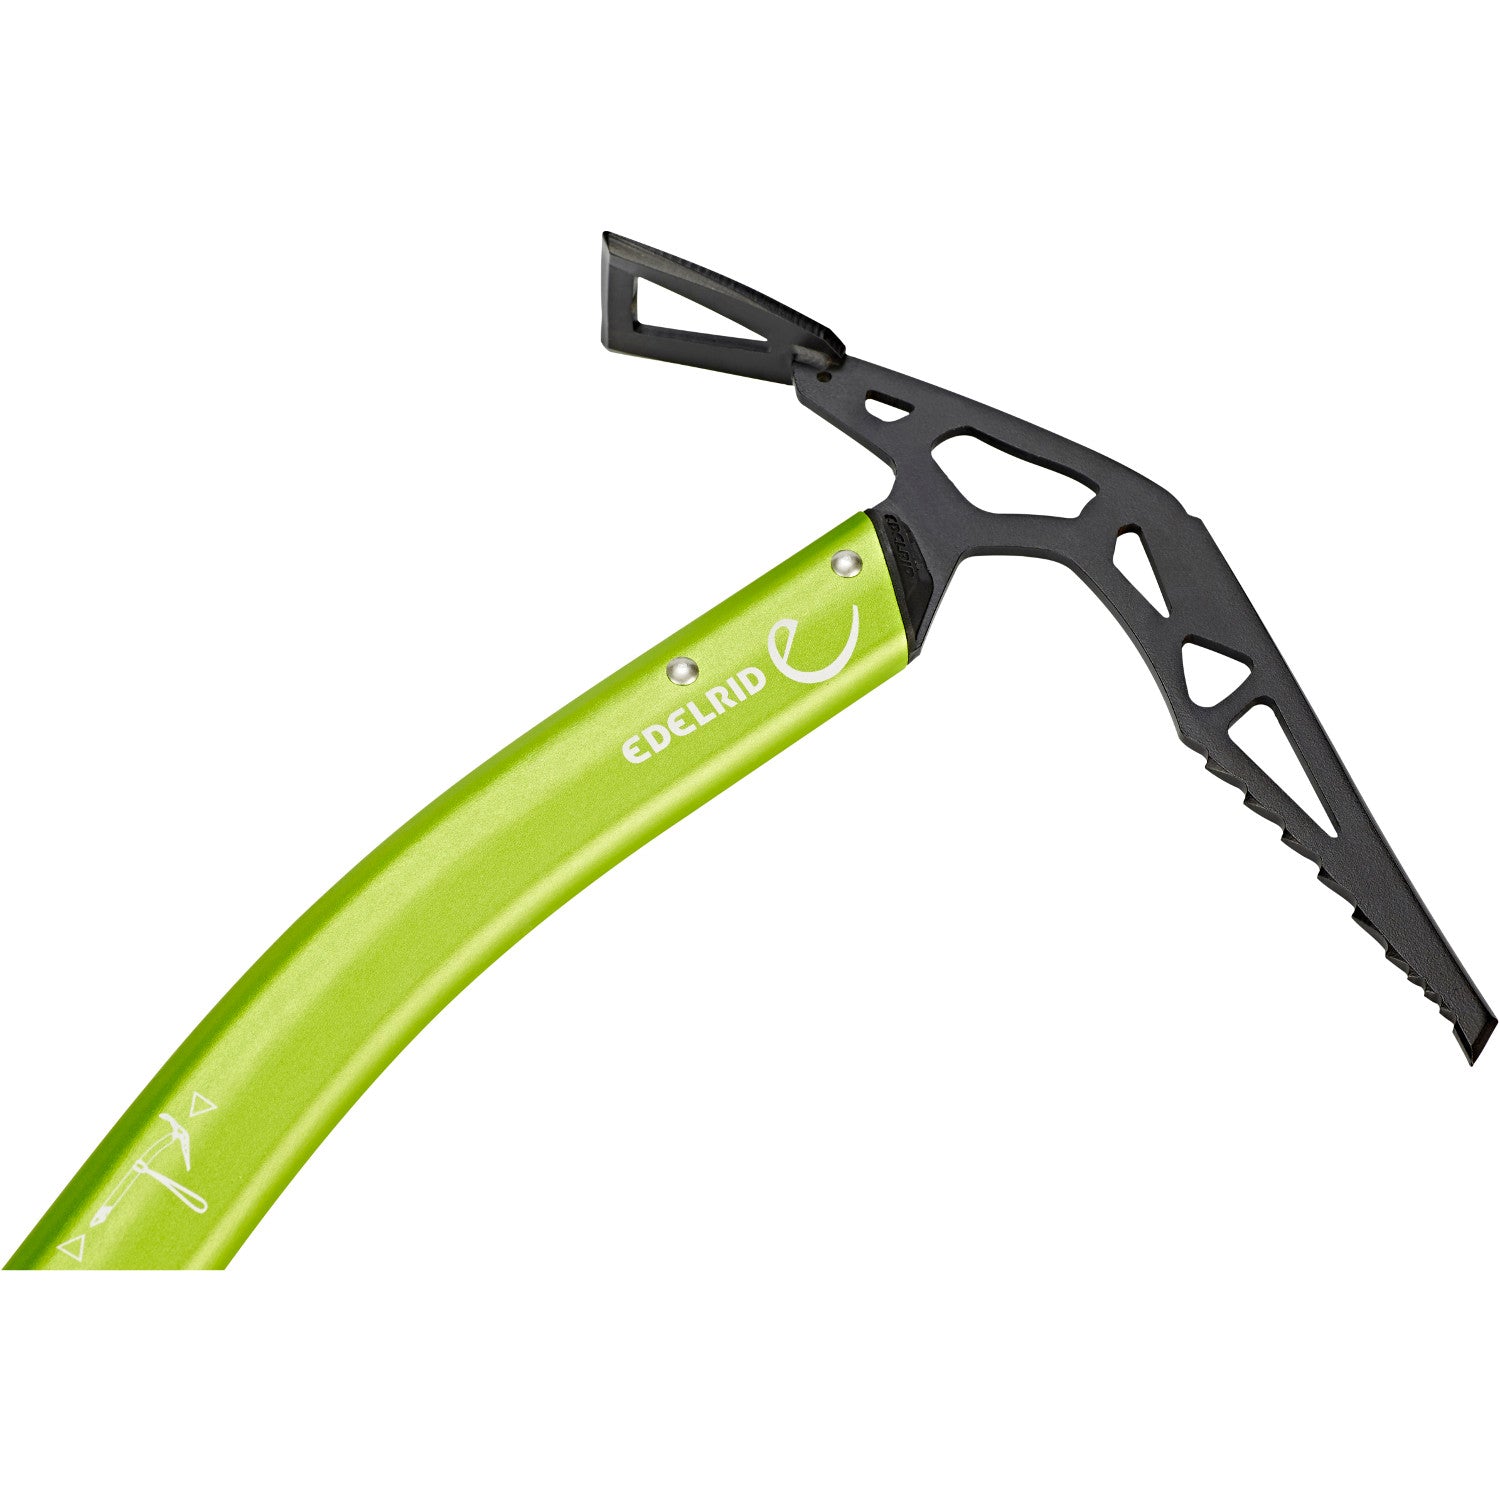 Edelrid Attila Ice Axe, shown in full with green coloured shaft and black pick